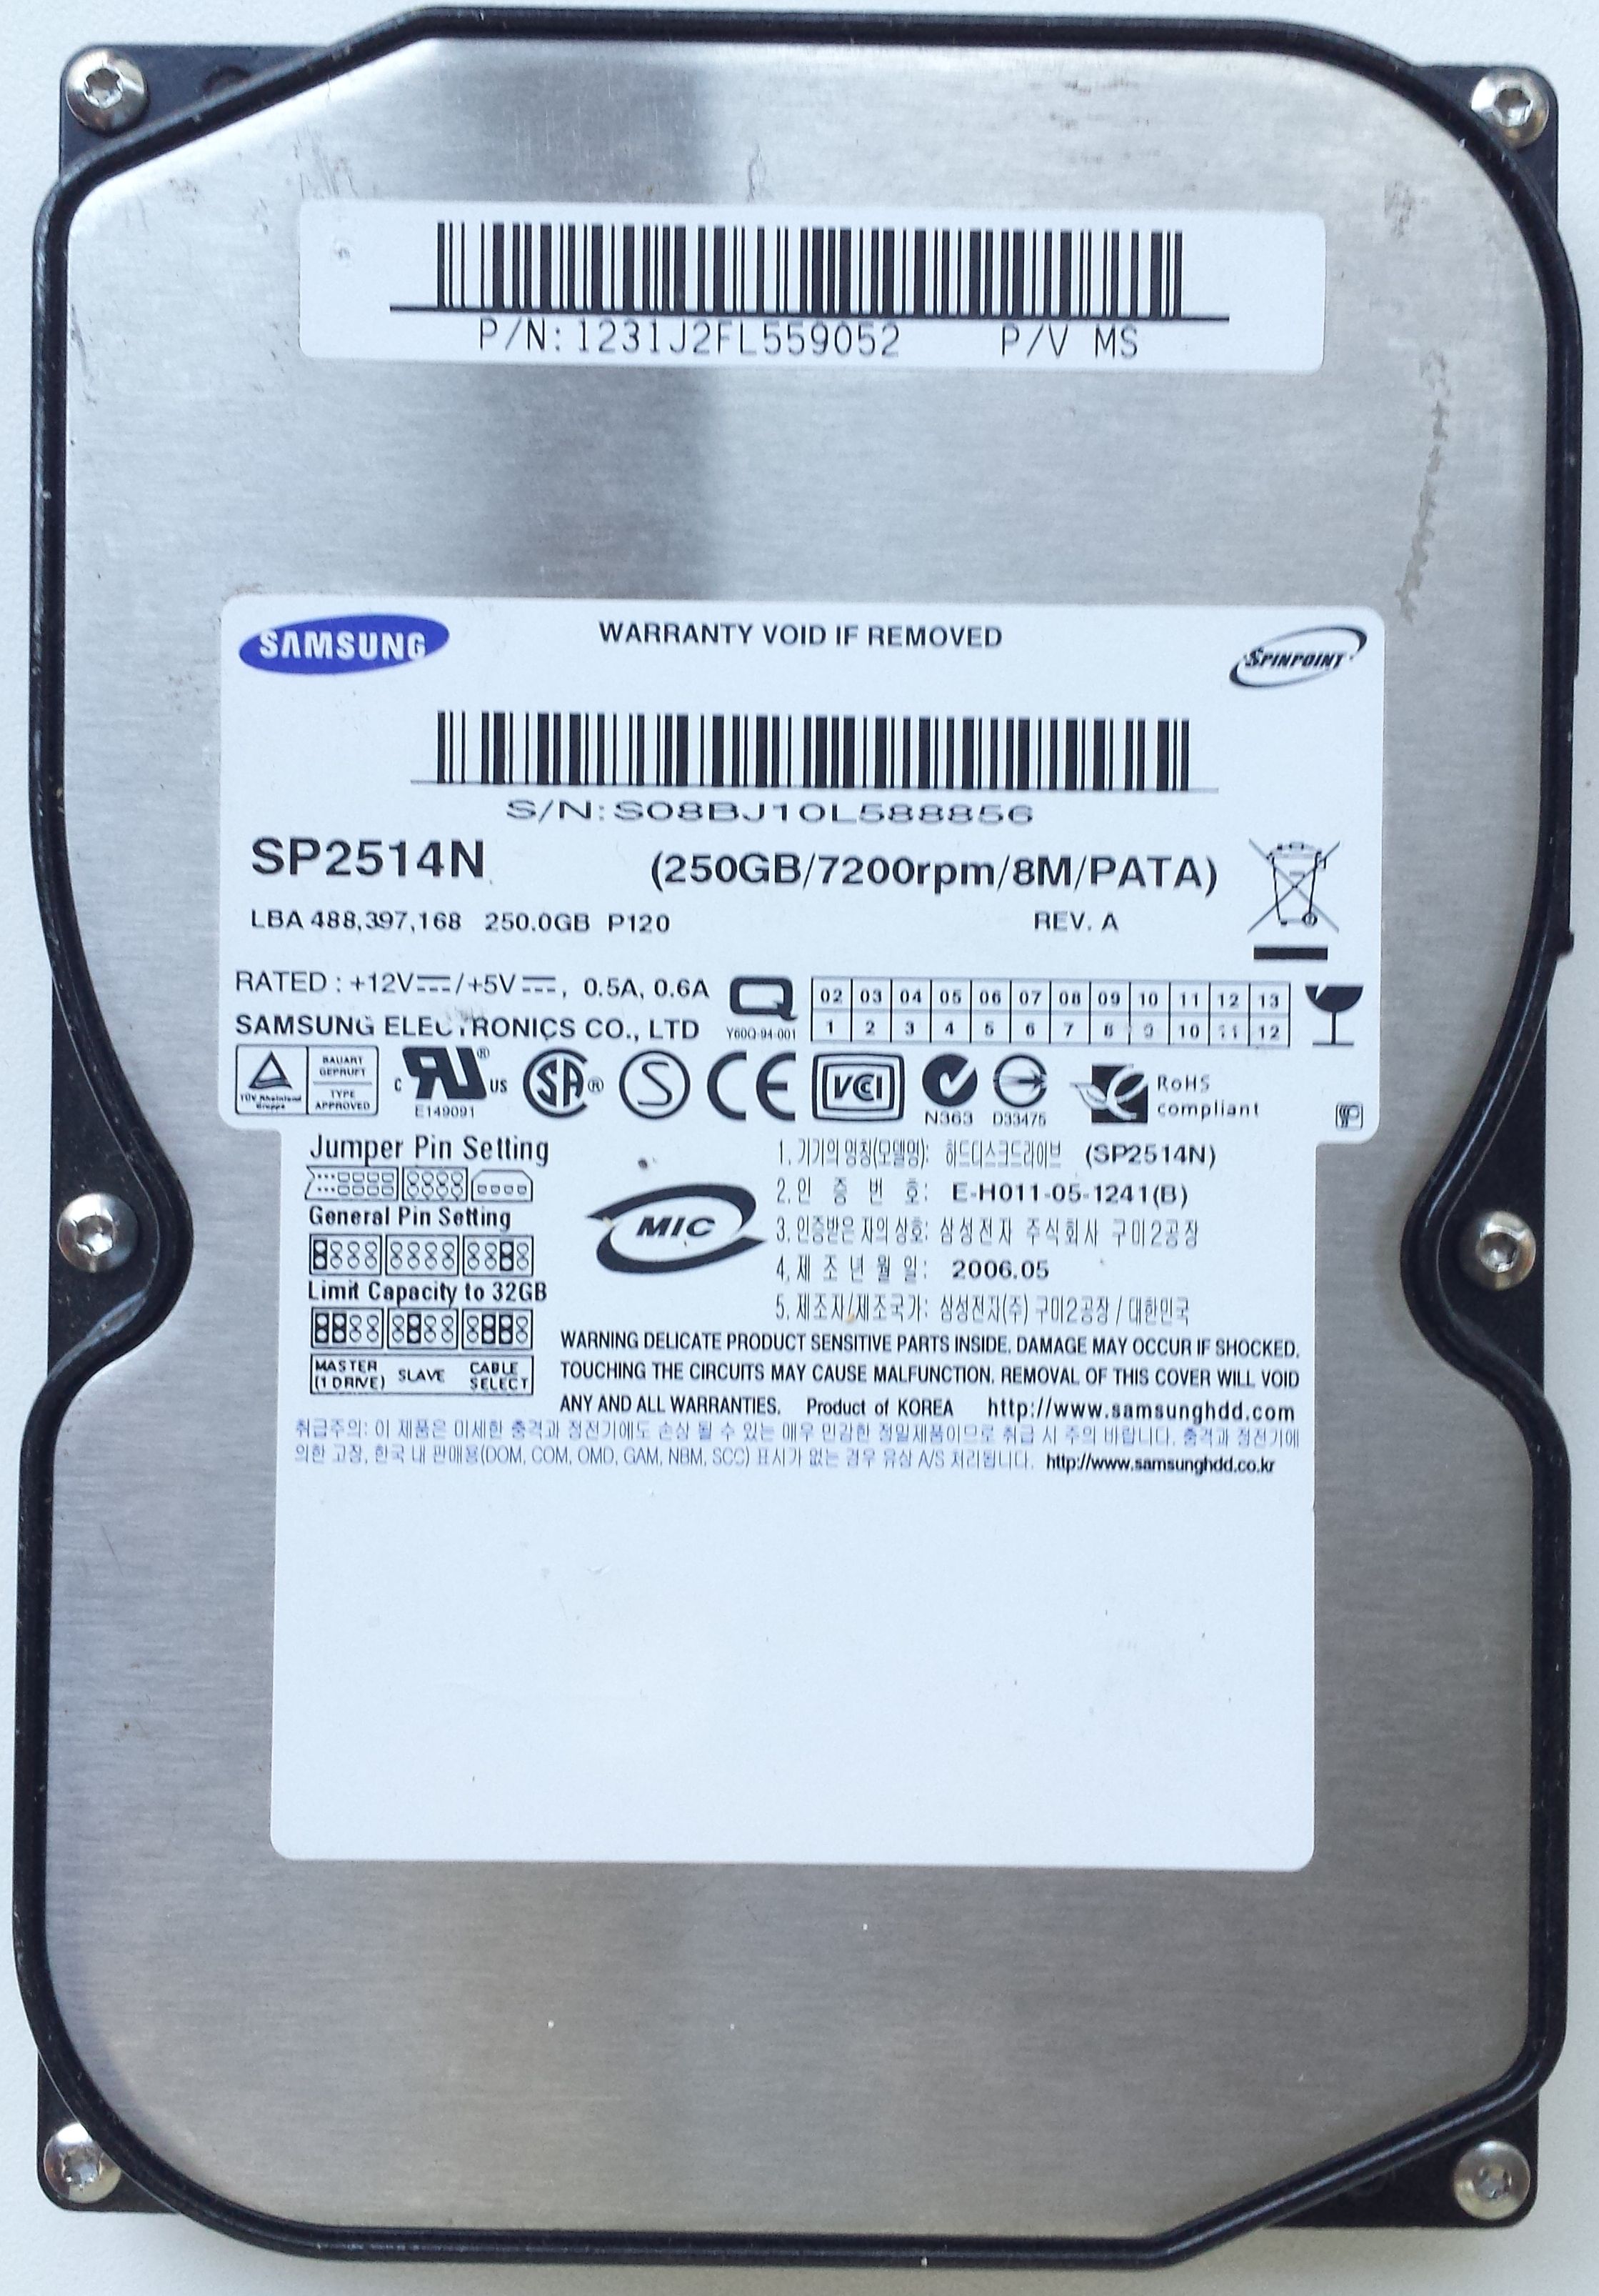 HDD PATA/133 3.5" 250GB / Samsung Spinpoint P120 (SP2514N)